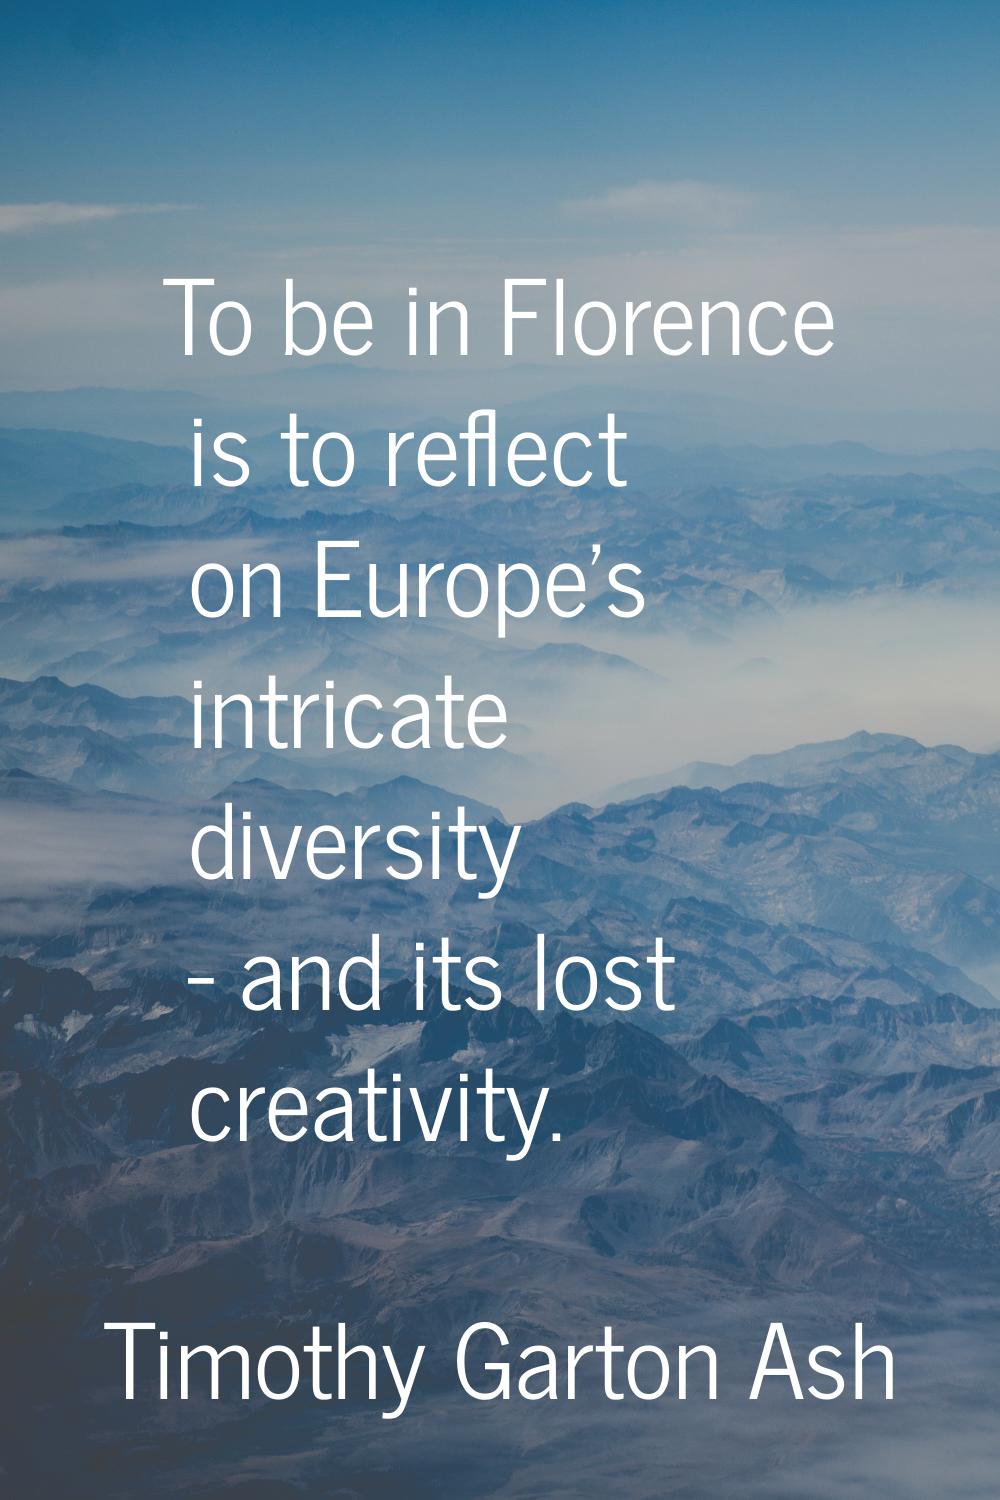 To be in Florence is to reflect on Europe's intricate diversity - and its lost creativity.